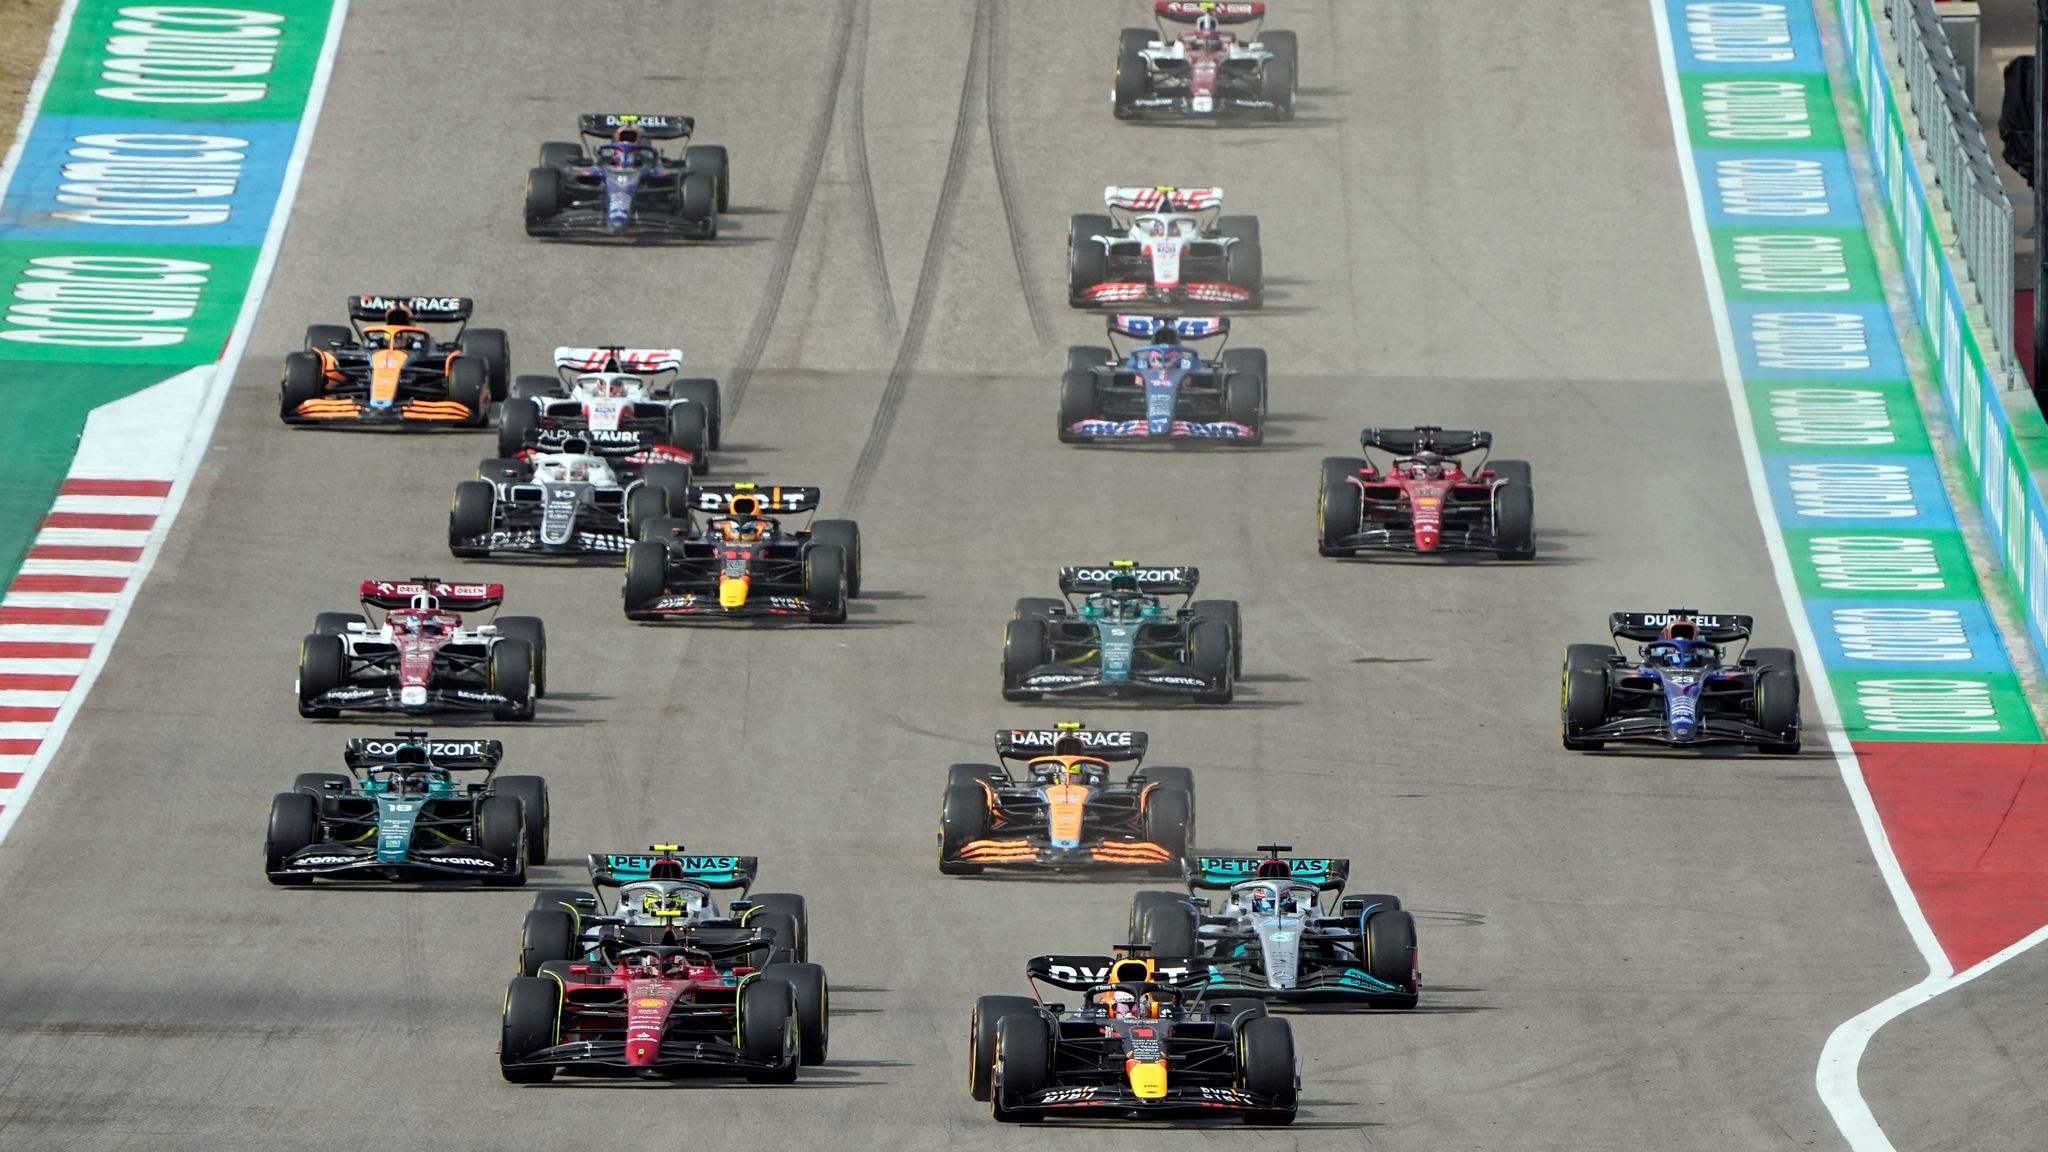 Why has Formula One become so attractive to car manufacturers? Video Watch TV Show Sky Sports